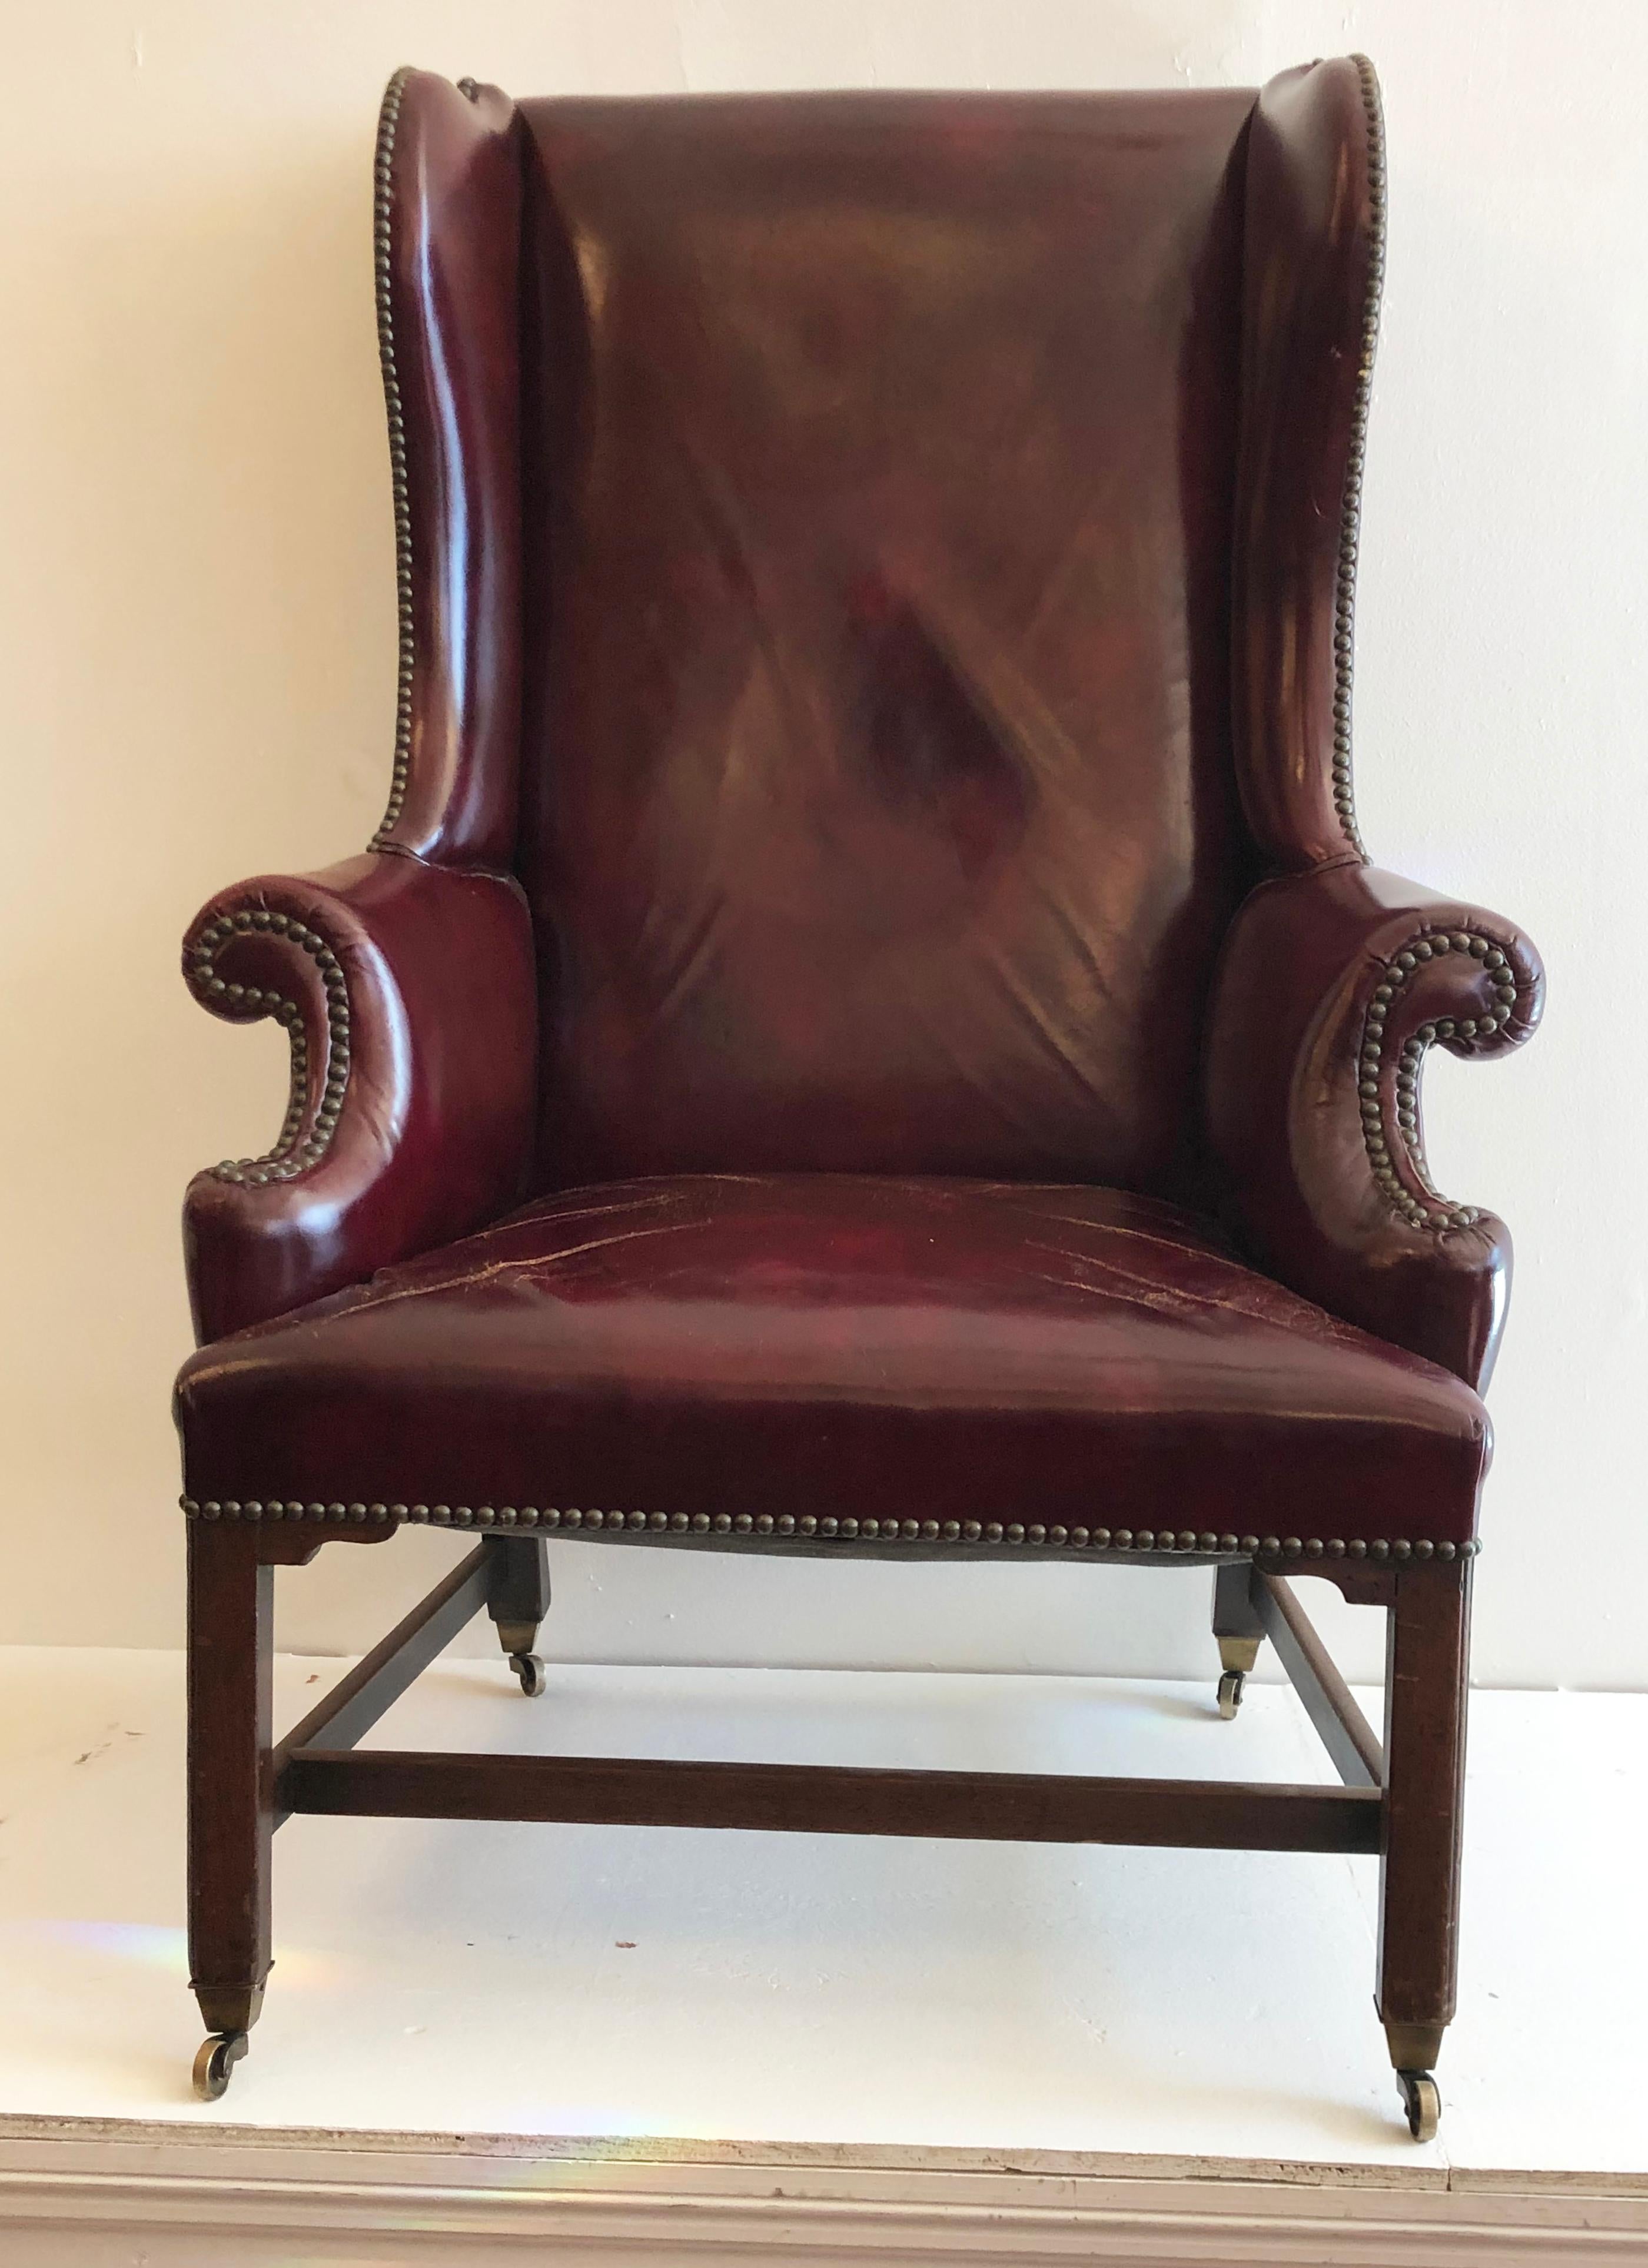 Classic 18th century Georgian Chippendale wing chair, made of mahogany and upholstered in leather. Raised on moulded mahogany marlborough shaped legs with brass casters. Wonderful chinoiserie design often found in the 18th century Chippendale period.